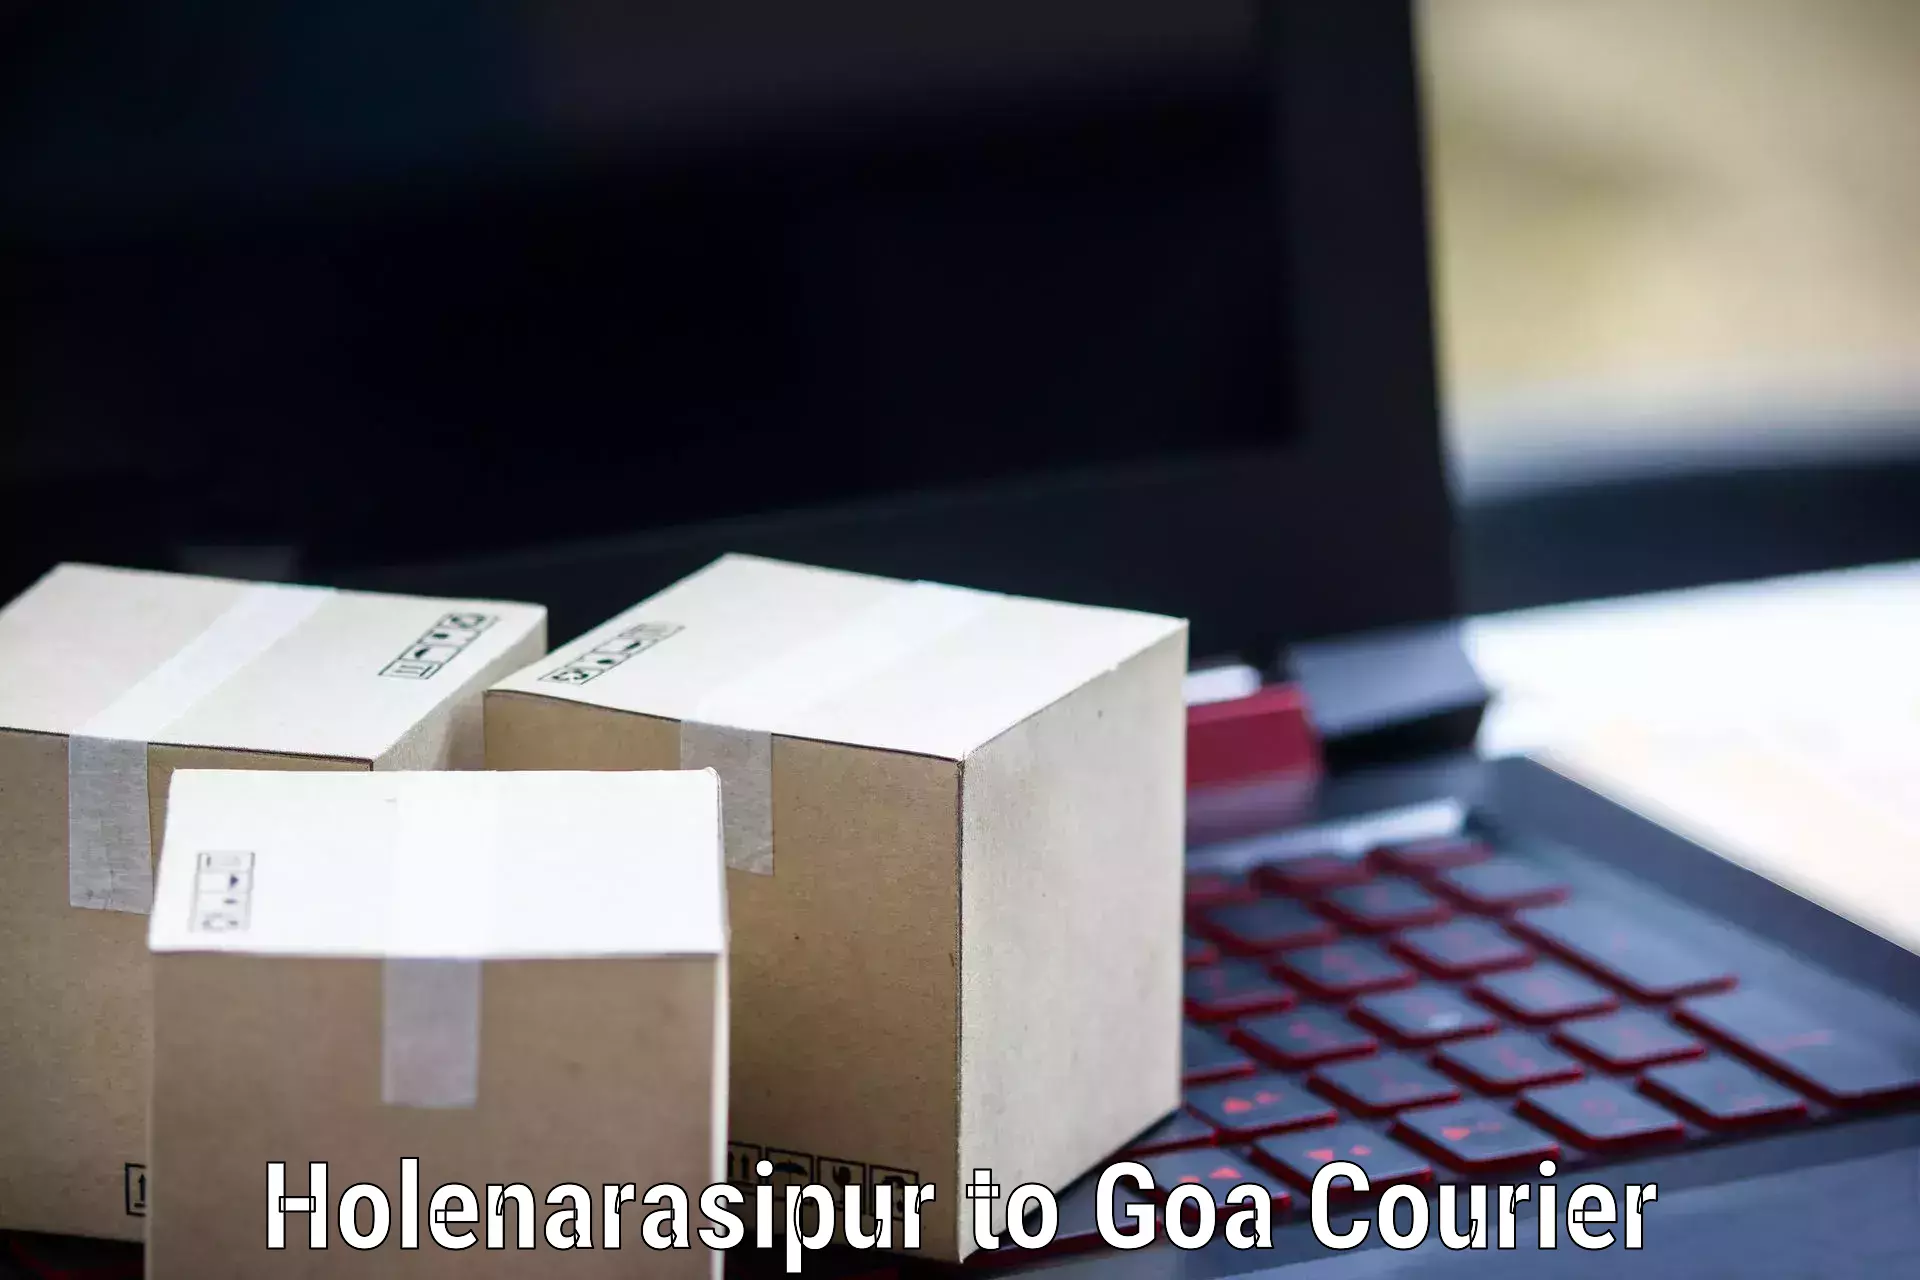 Reliable delivery network Holenarasipur to South Goa